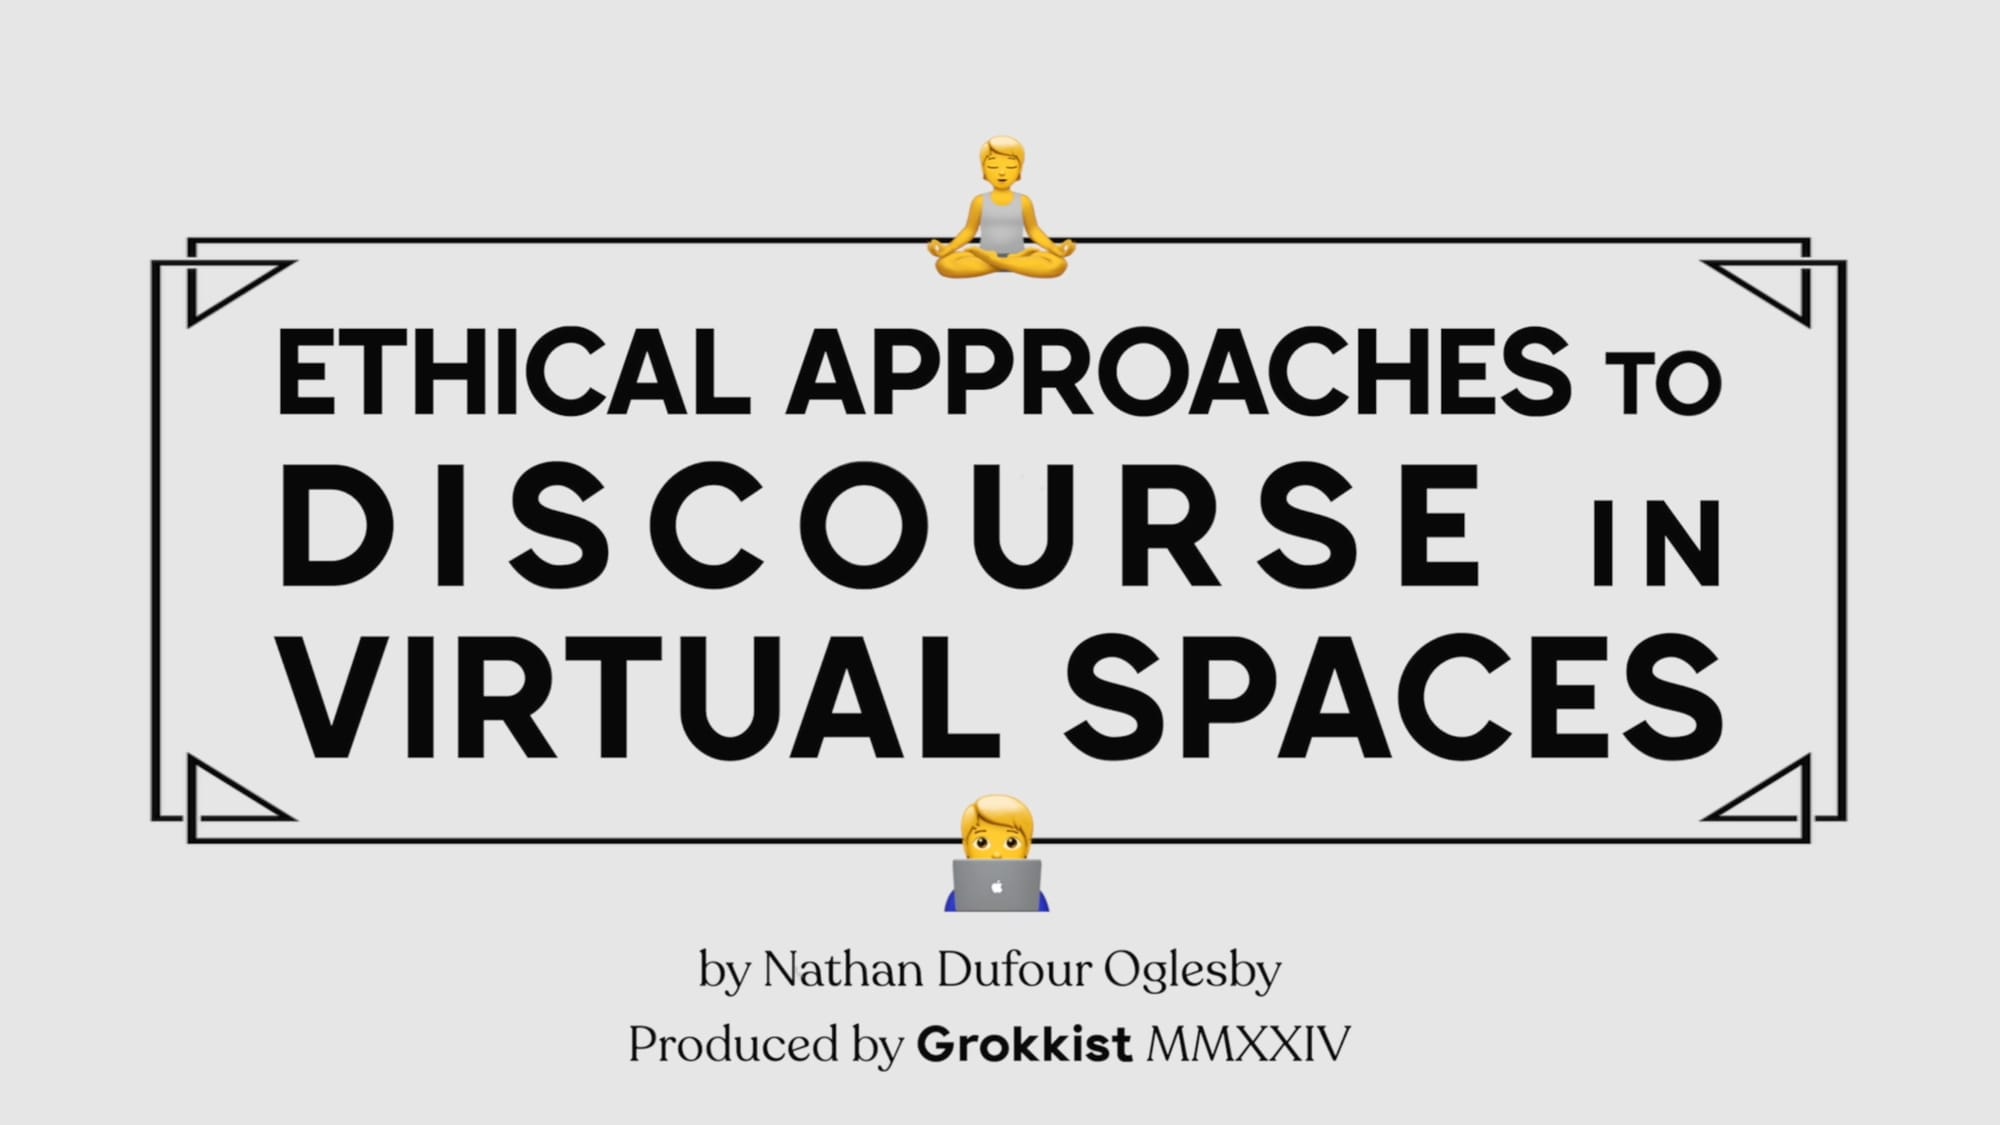 Ethical Approaches to Discourse in Virtual Spaces